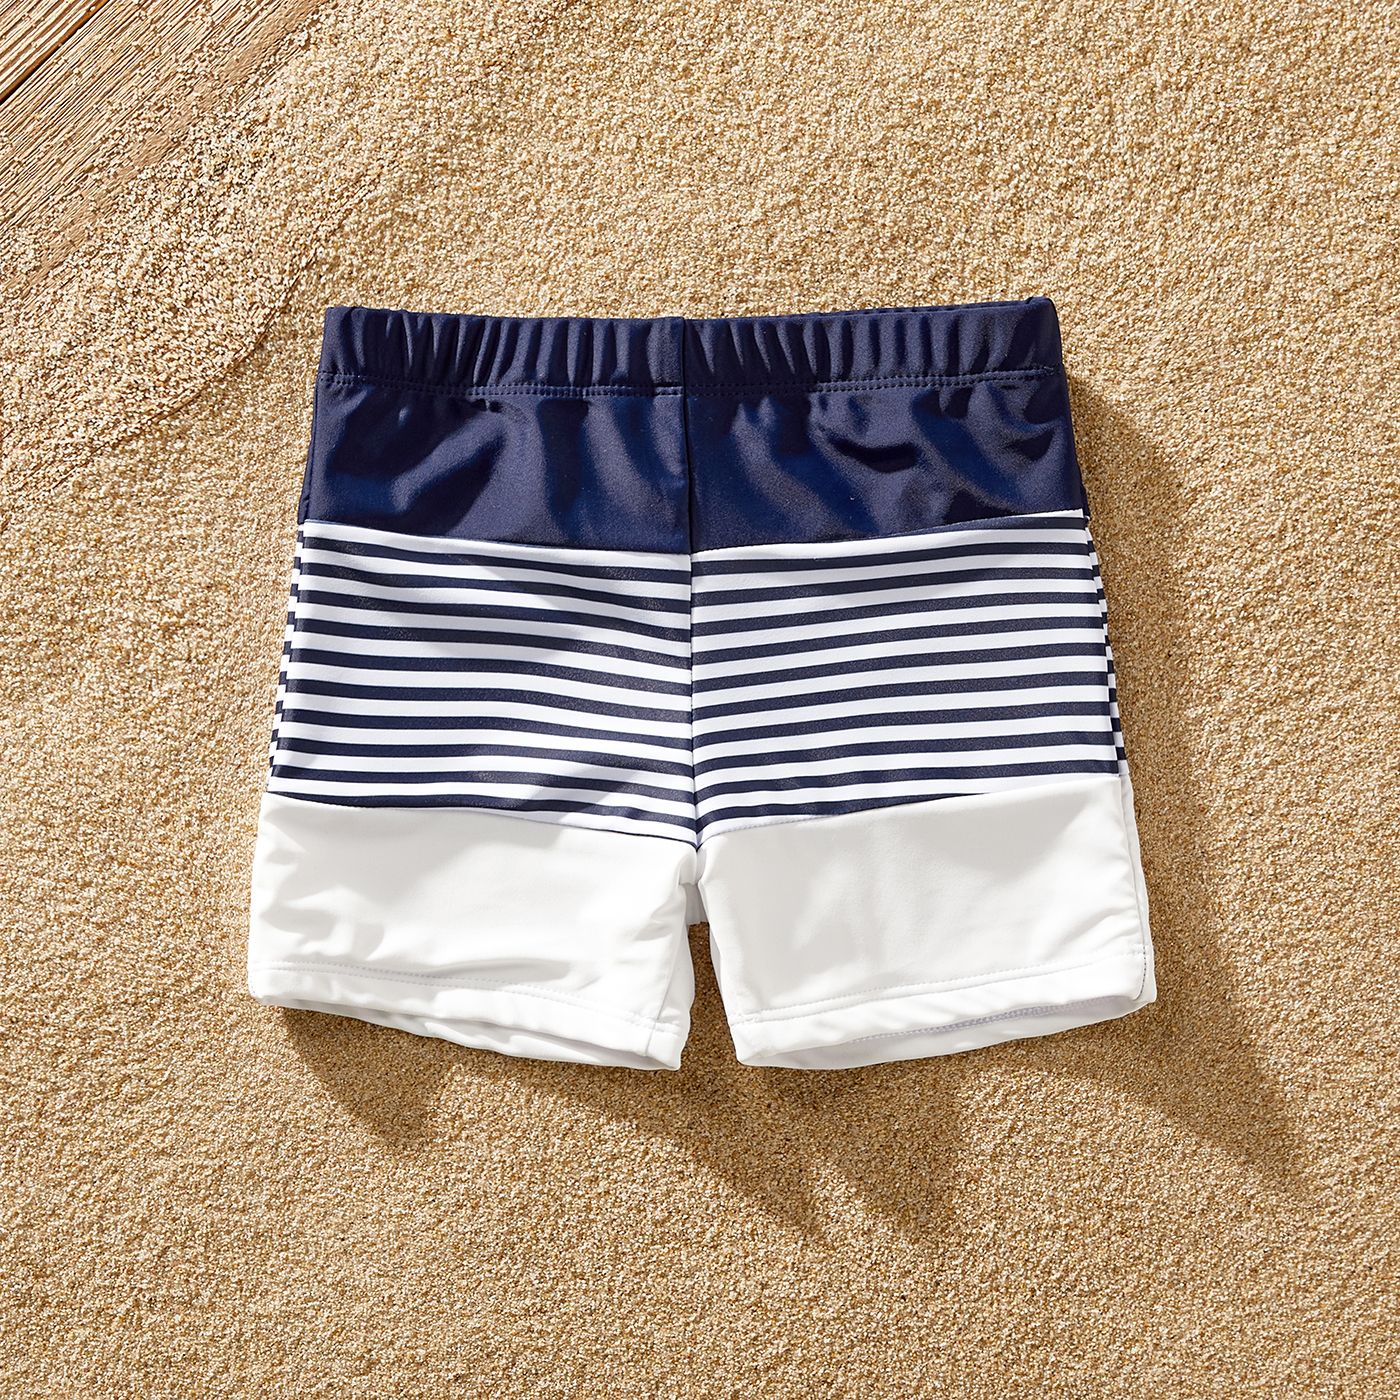 Family Matching Pinstriped Colorblock One Shoulder One-piece Swimsuit Or Swim Trunks Shorts